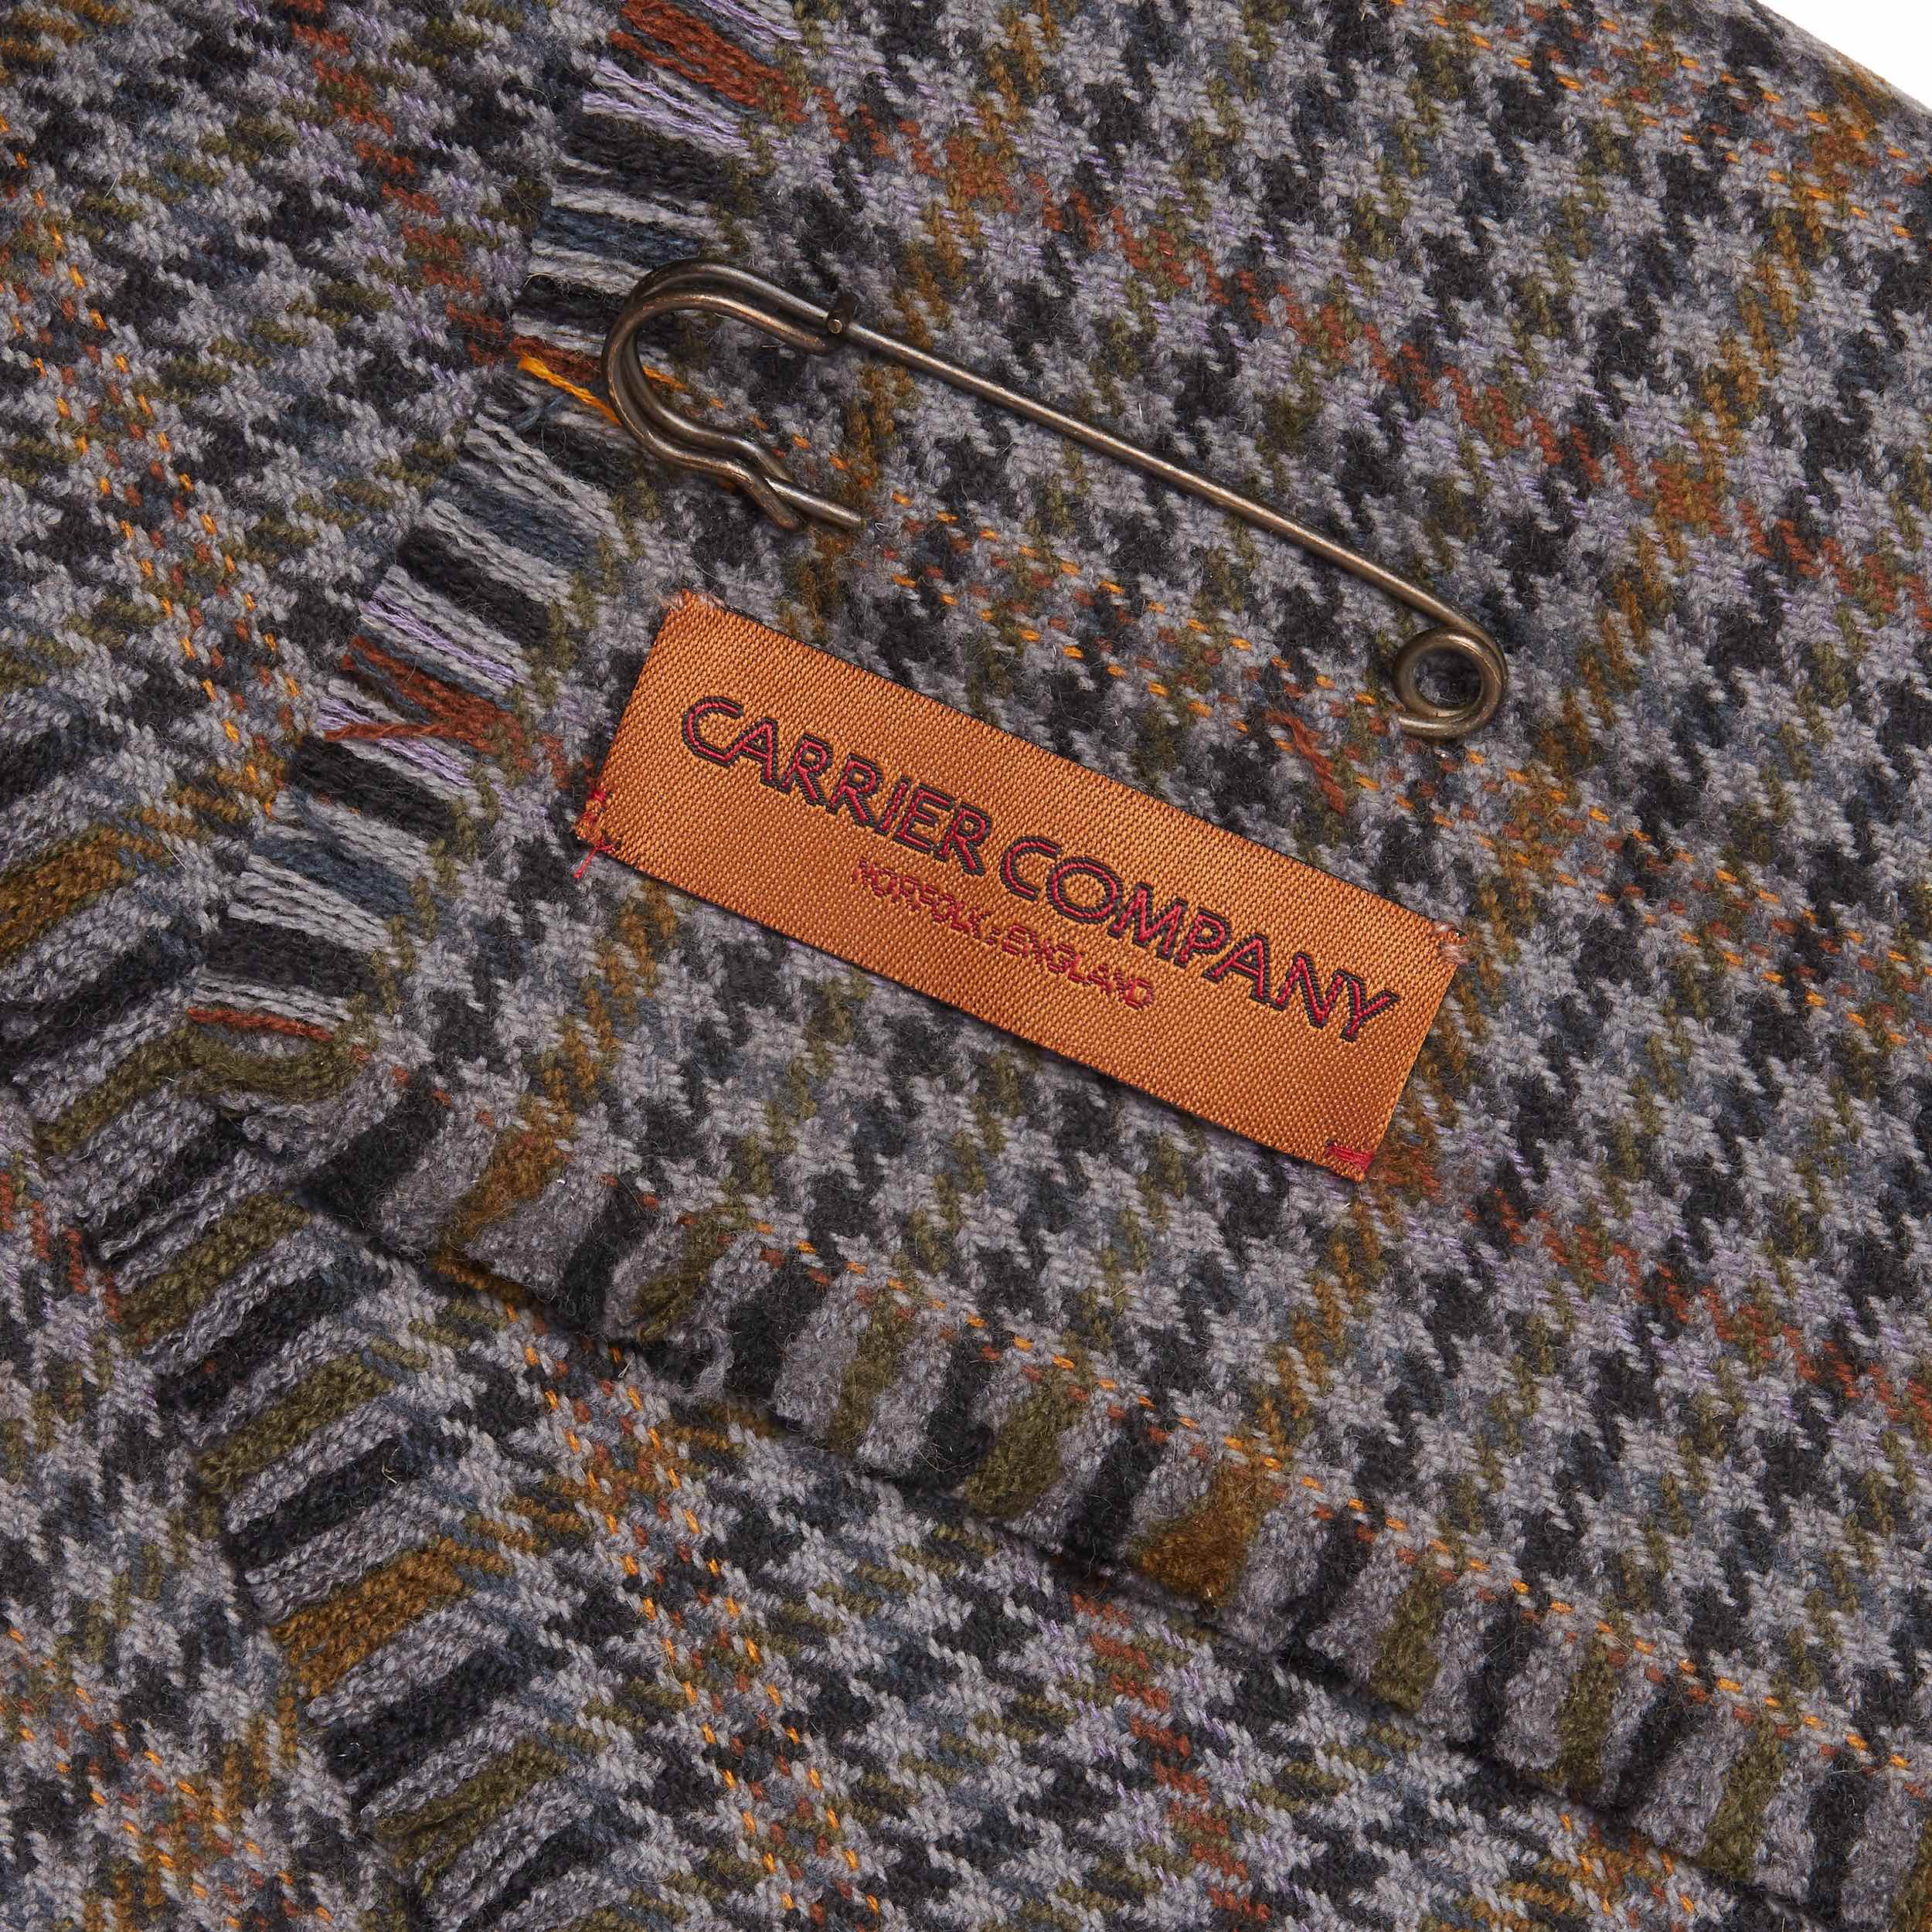 Carrier Company Short Cashmere Scarf in Grey & Orange Houndstooth